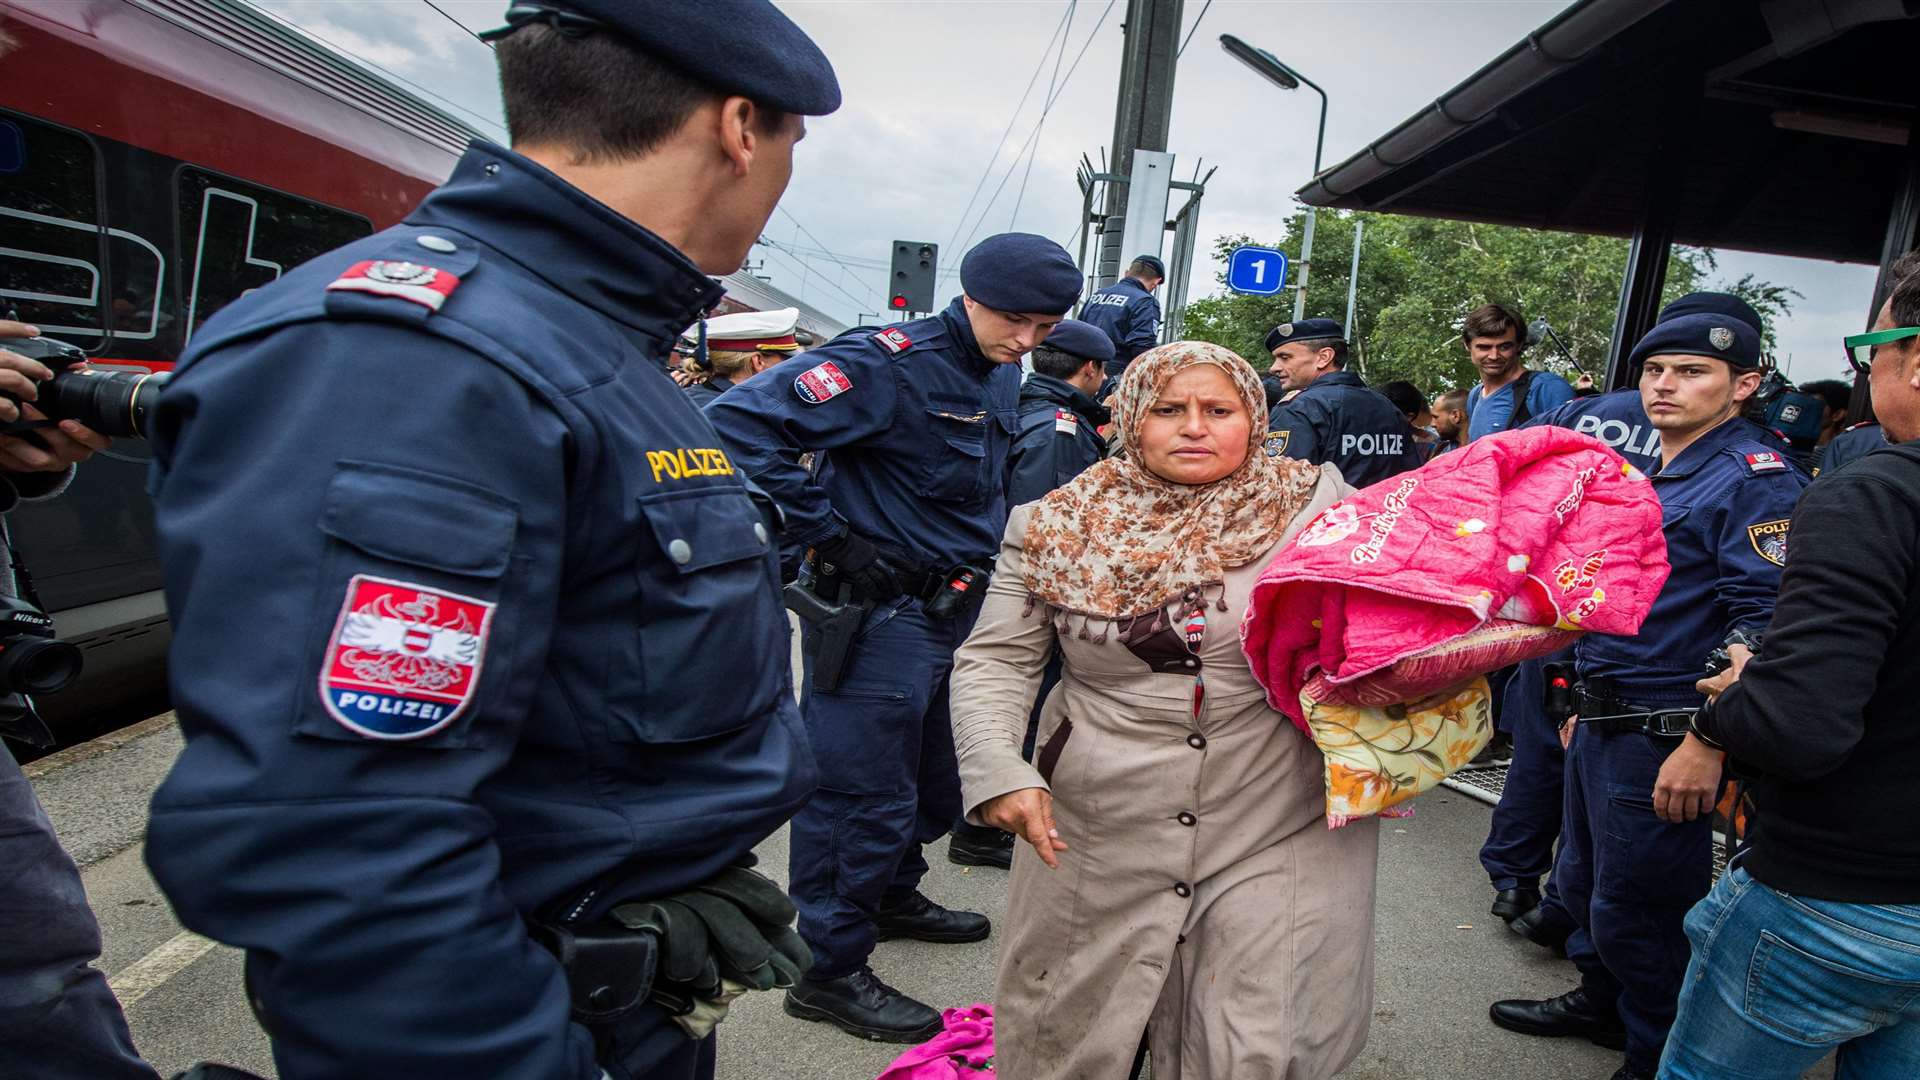 Refugees who have crossed the border from Hungary board a train to Munich from Nickelsdorf, Austria. Picture: SWNS.com